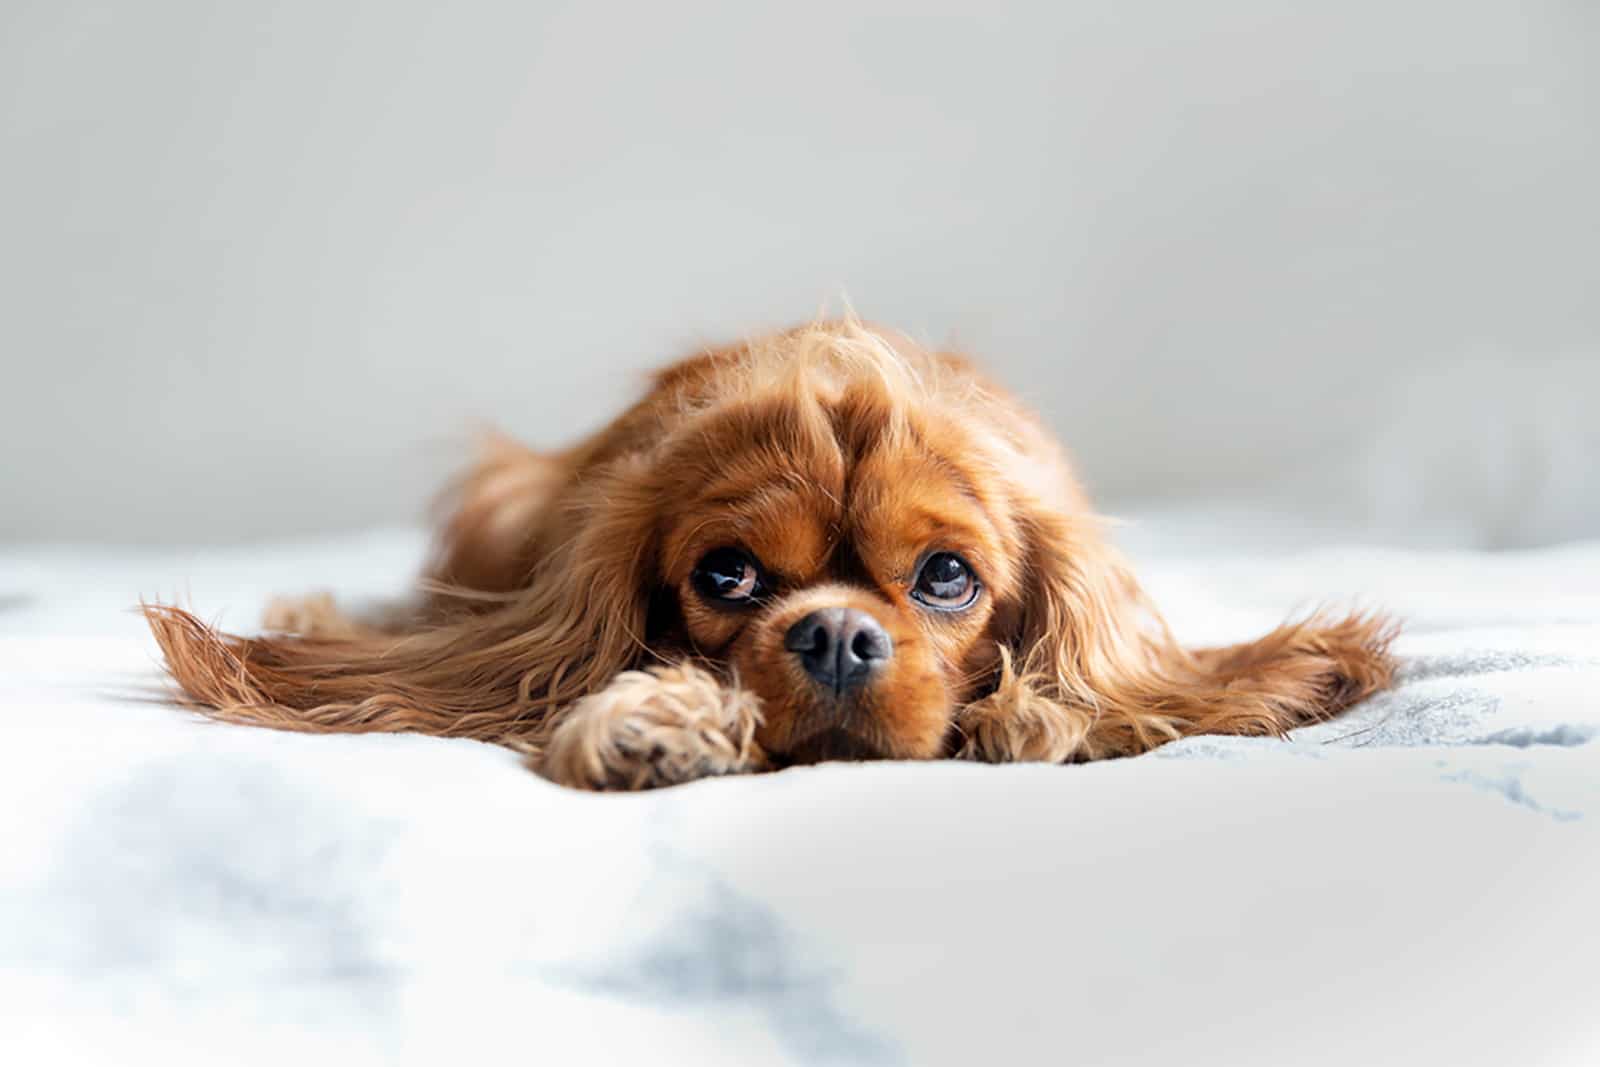 cavalier king charles spaniel dog relaxing on the bed